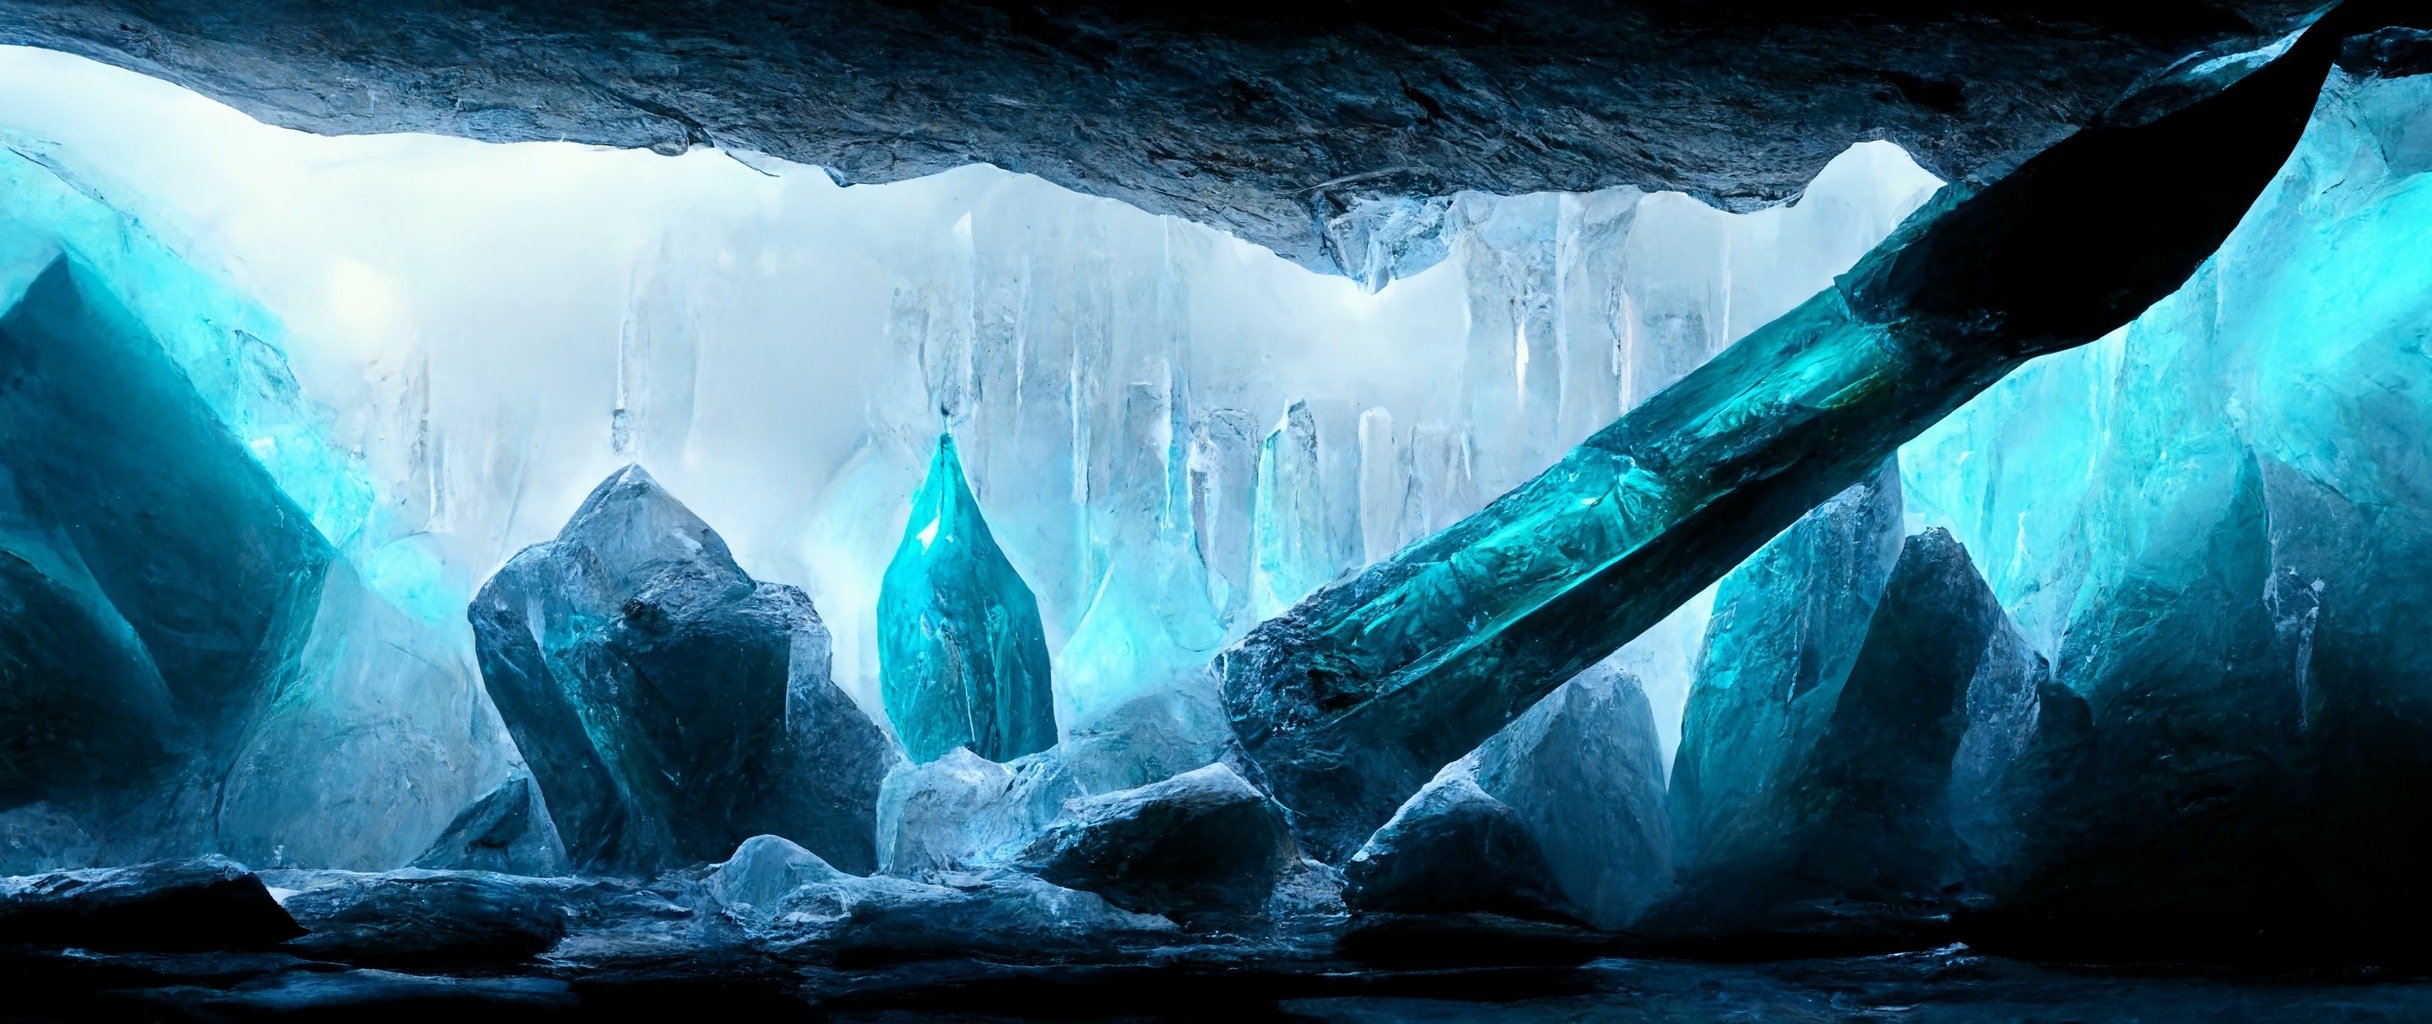 bece2fdc-e391-4a12-9e2c-e4a73de5051c_S3RAPH_frozen_Trident_crystal_in_ice_cave_with_reflective._8k_cinematic_composition_illustrated_style_w_204.JPG